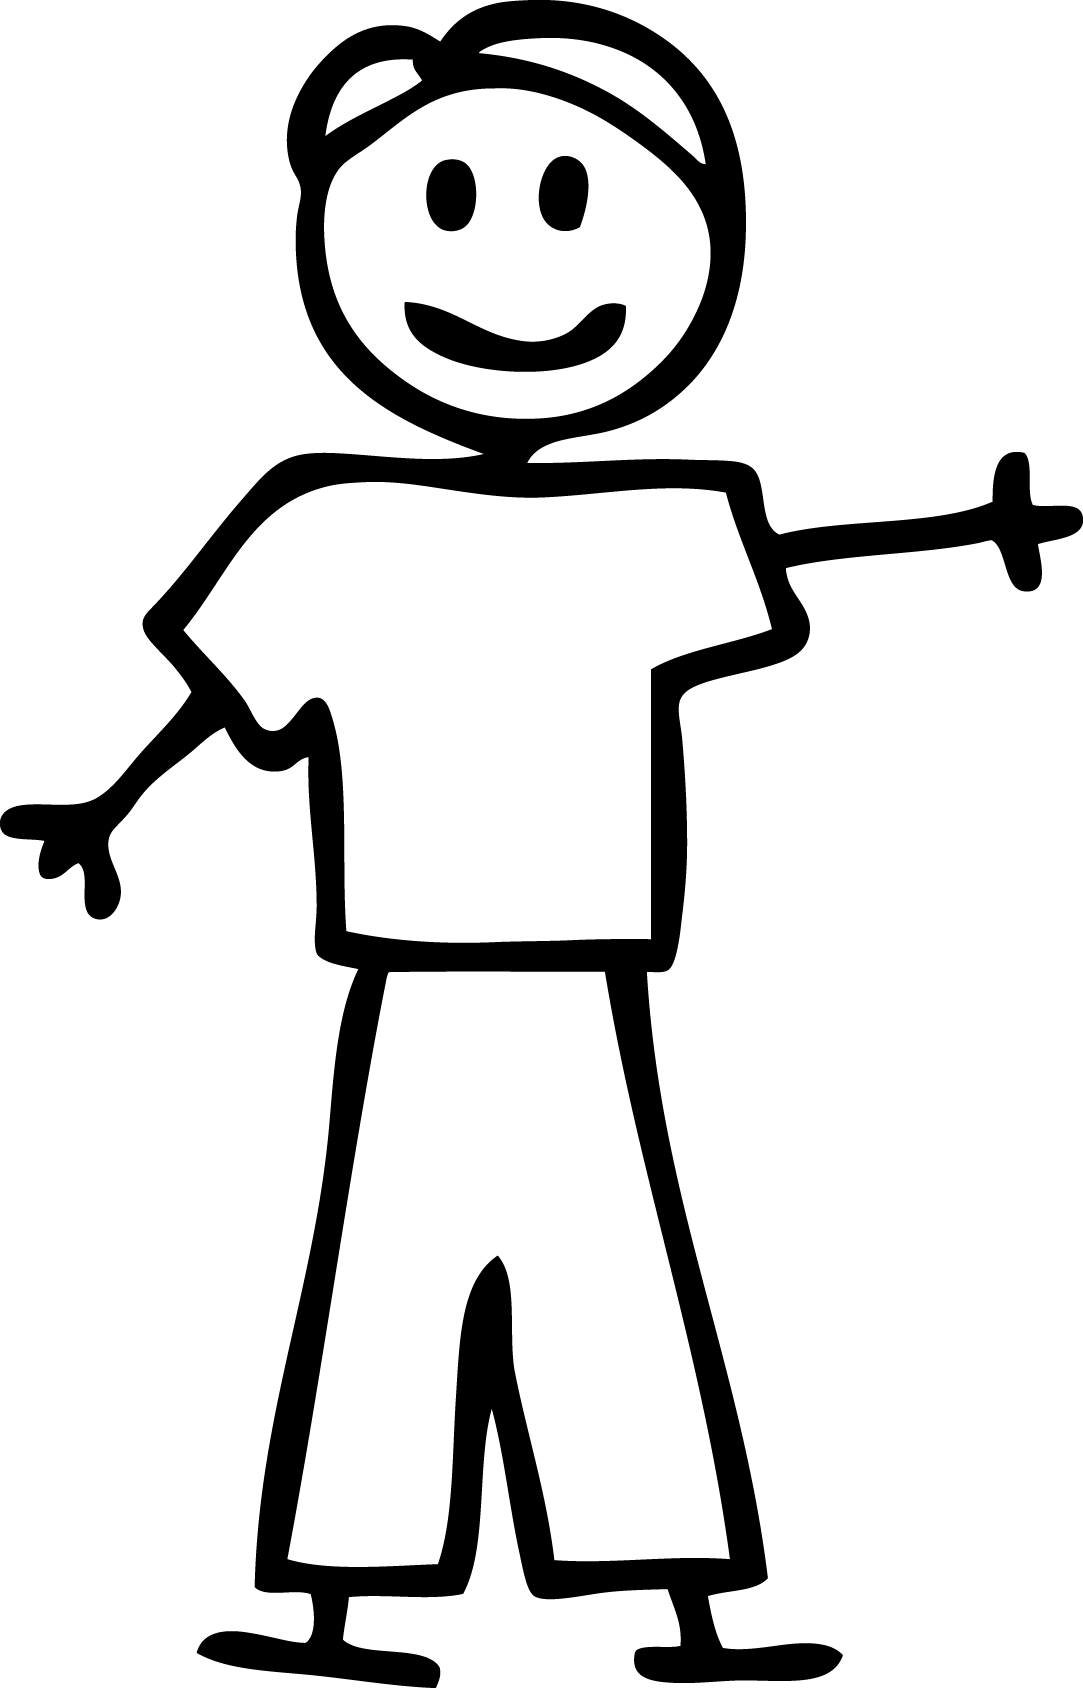 Pics Of Stick People - ClipArt Best